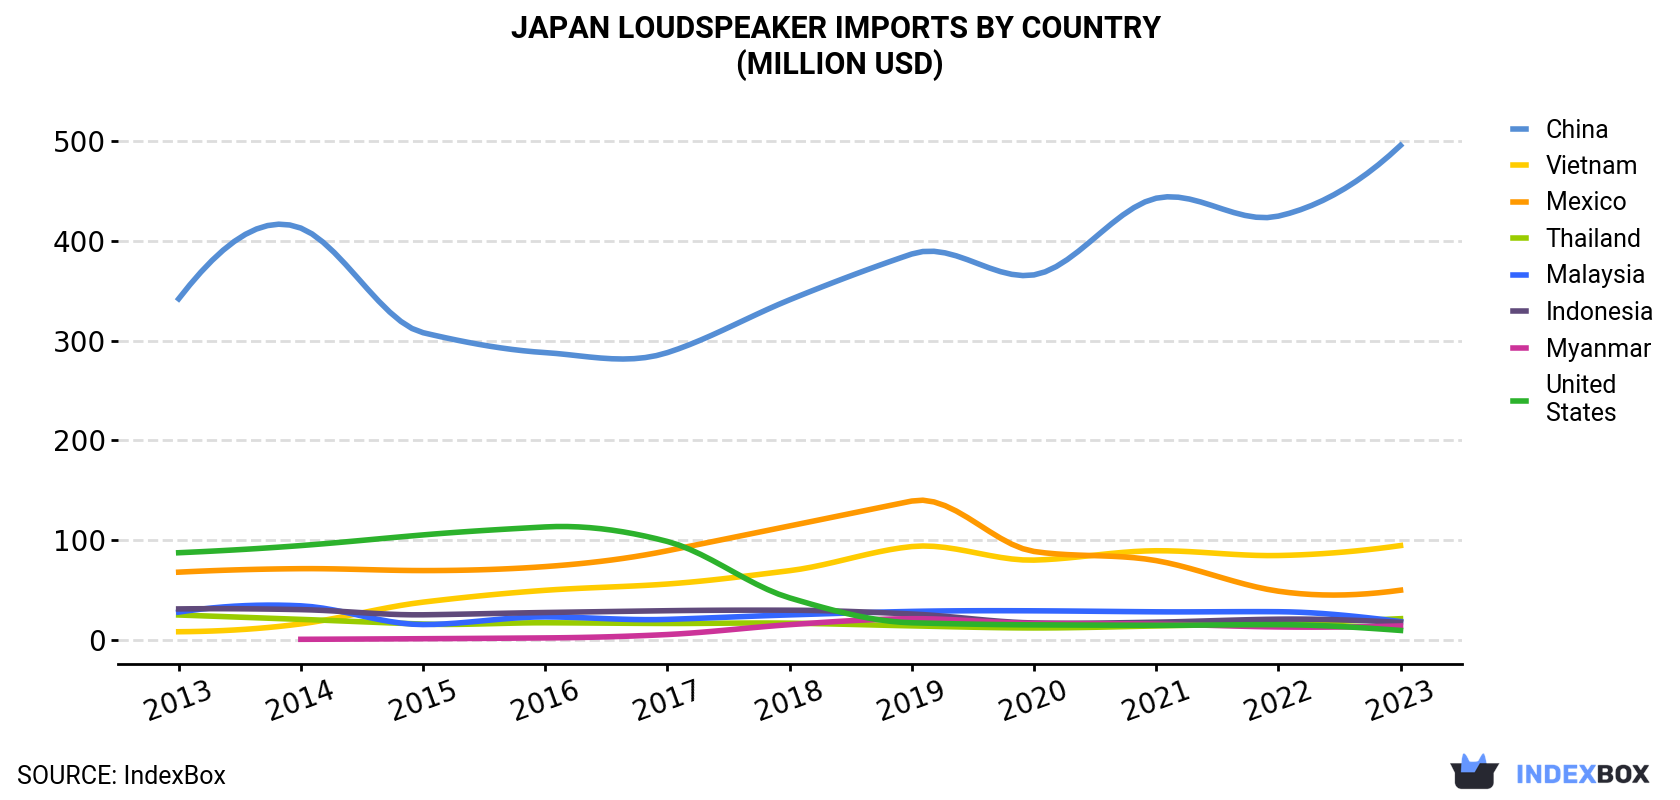 Japan Loudspeaker Imports By Country (Million USD)